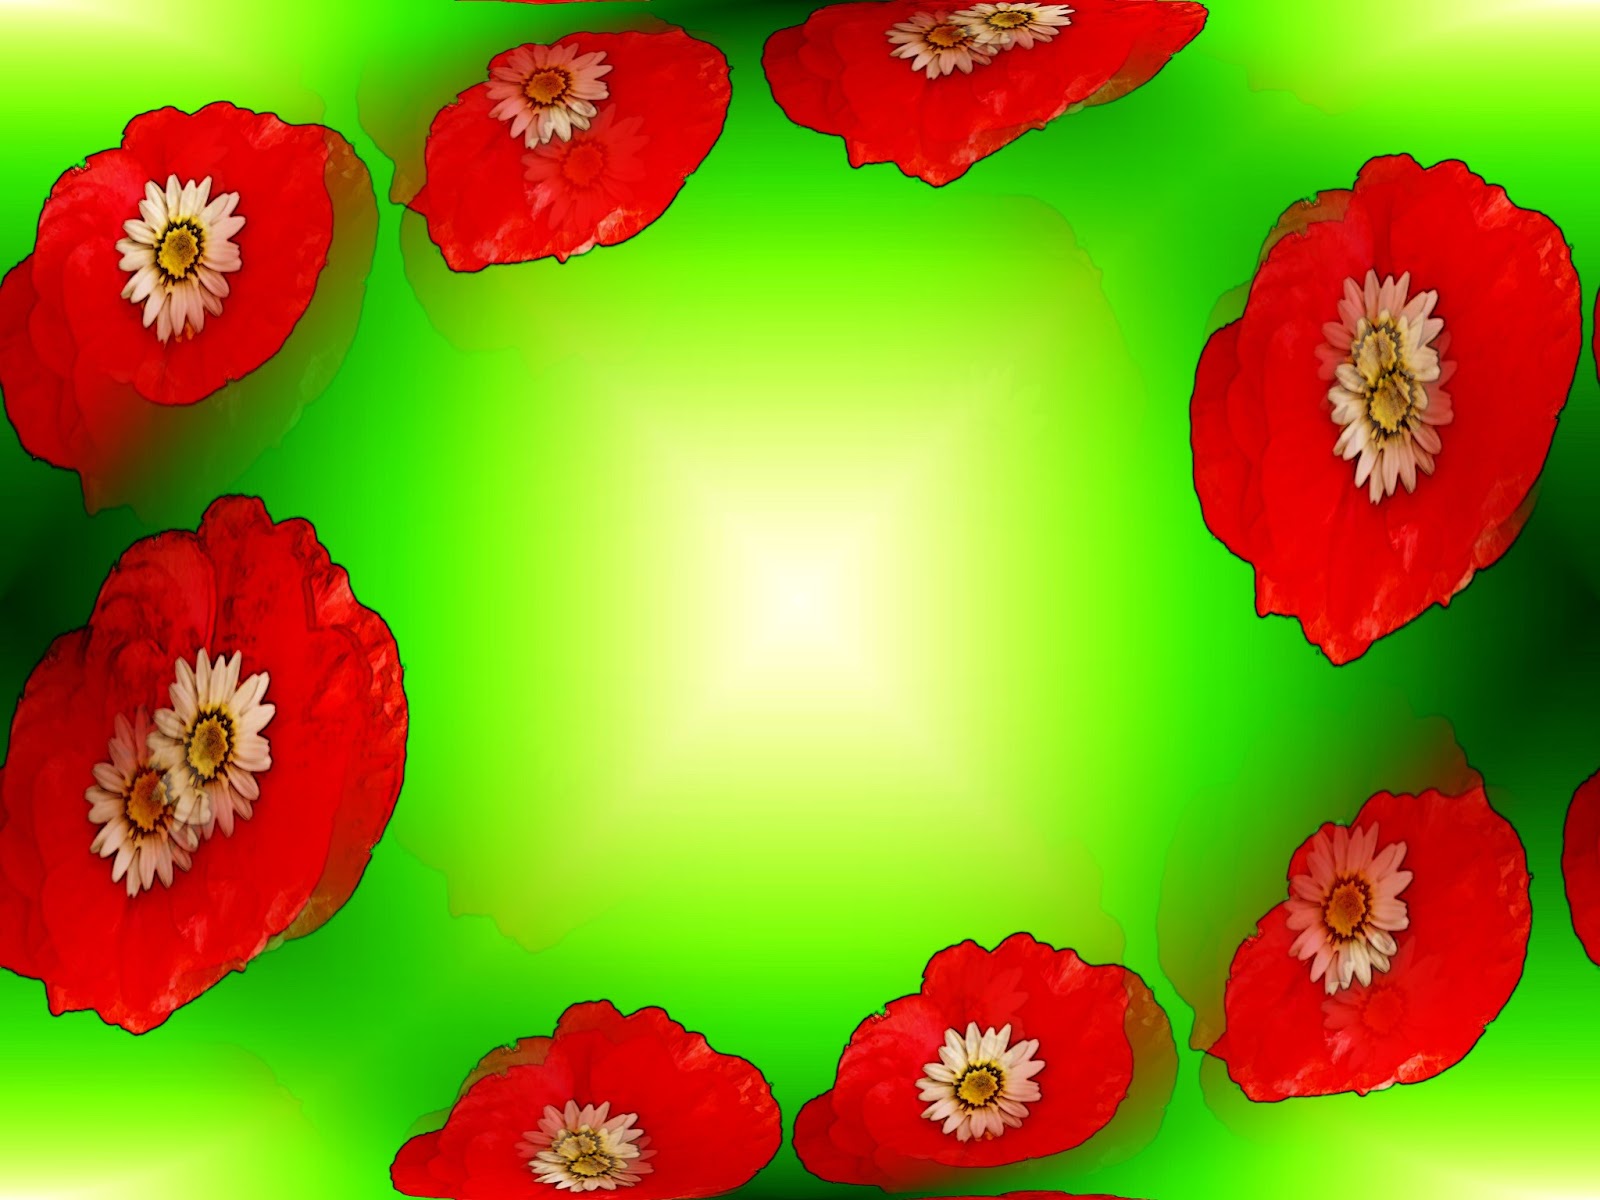 poppy-borders-and-frames-june-26th-2013